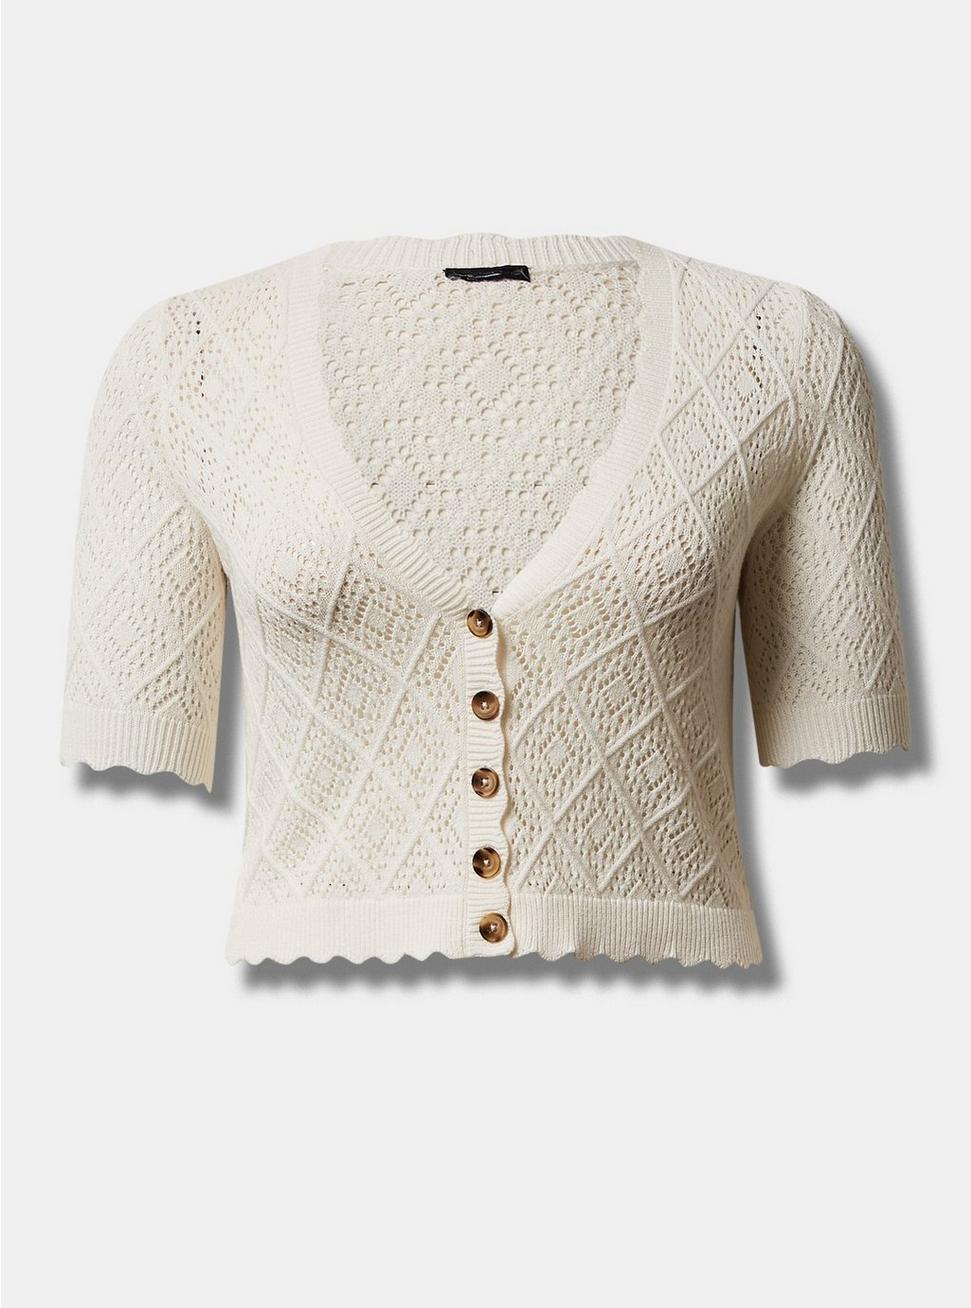 Pointelle Cardigan Button Front Cropped Sweater, PRISTINE, hi-res